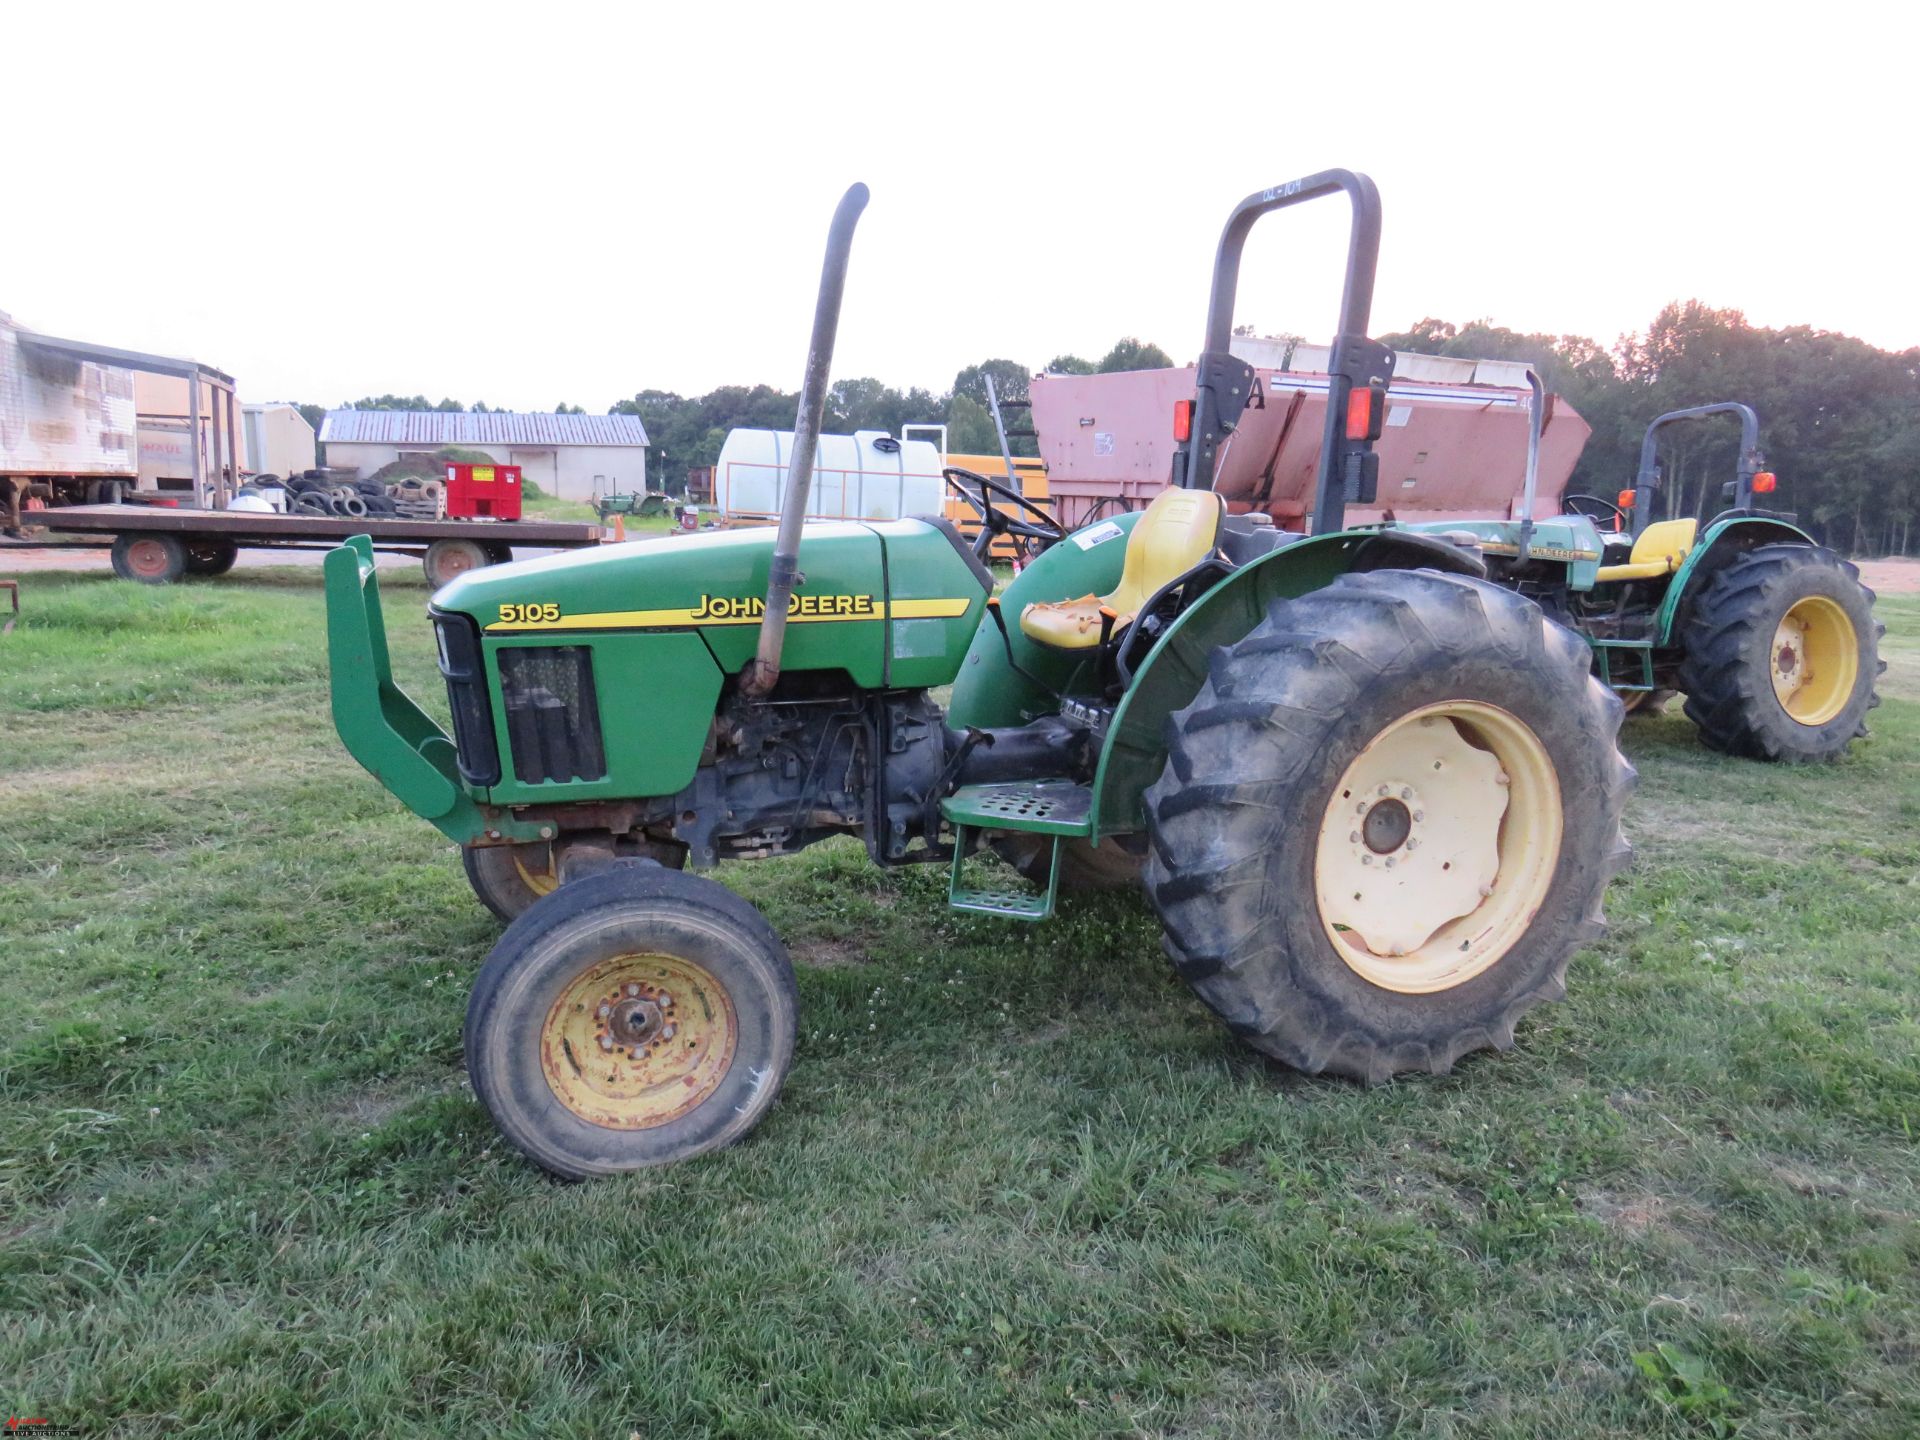 2004 JOHN DEERE 5105 TRACTOR, PTO, 16.9-28 REAR TIRES, 4178 HOURS SHOWING (HOURS SUBJECT TO CHANGE),